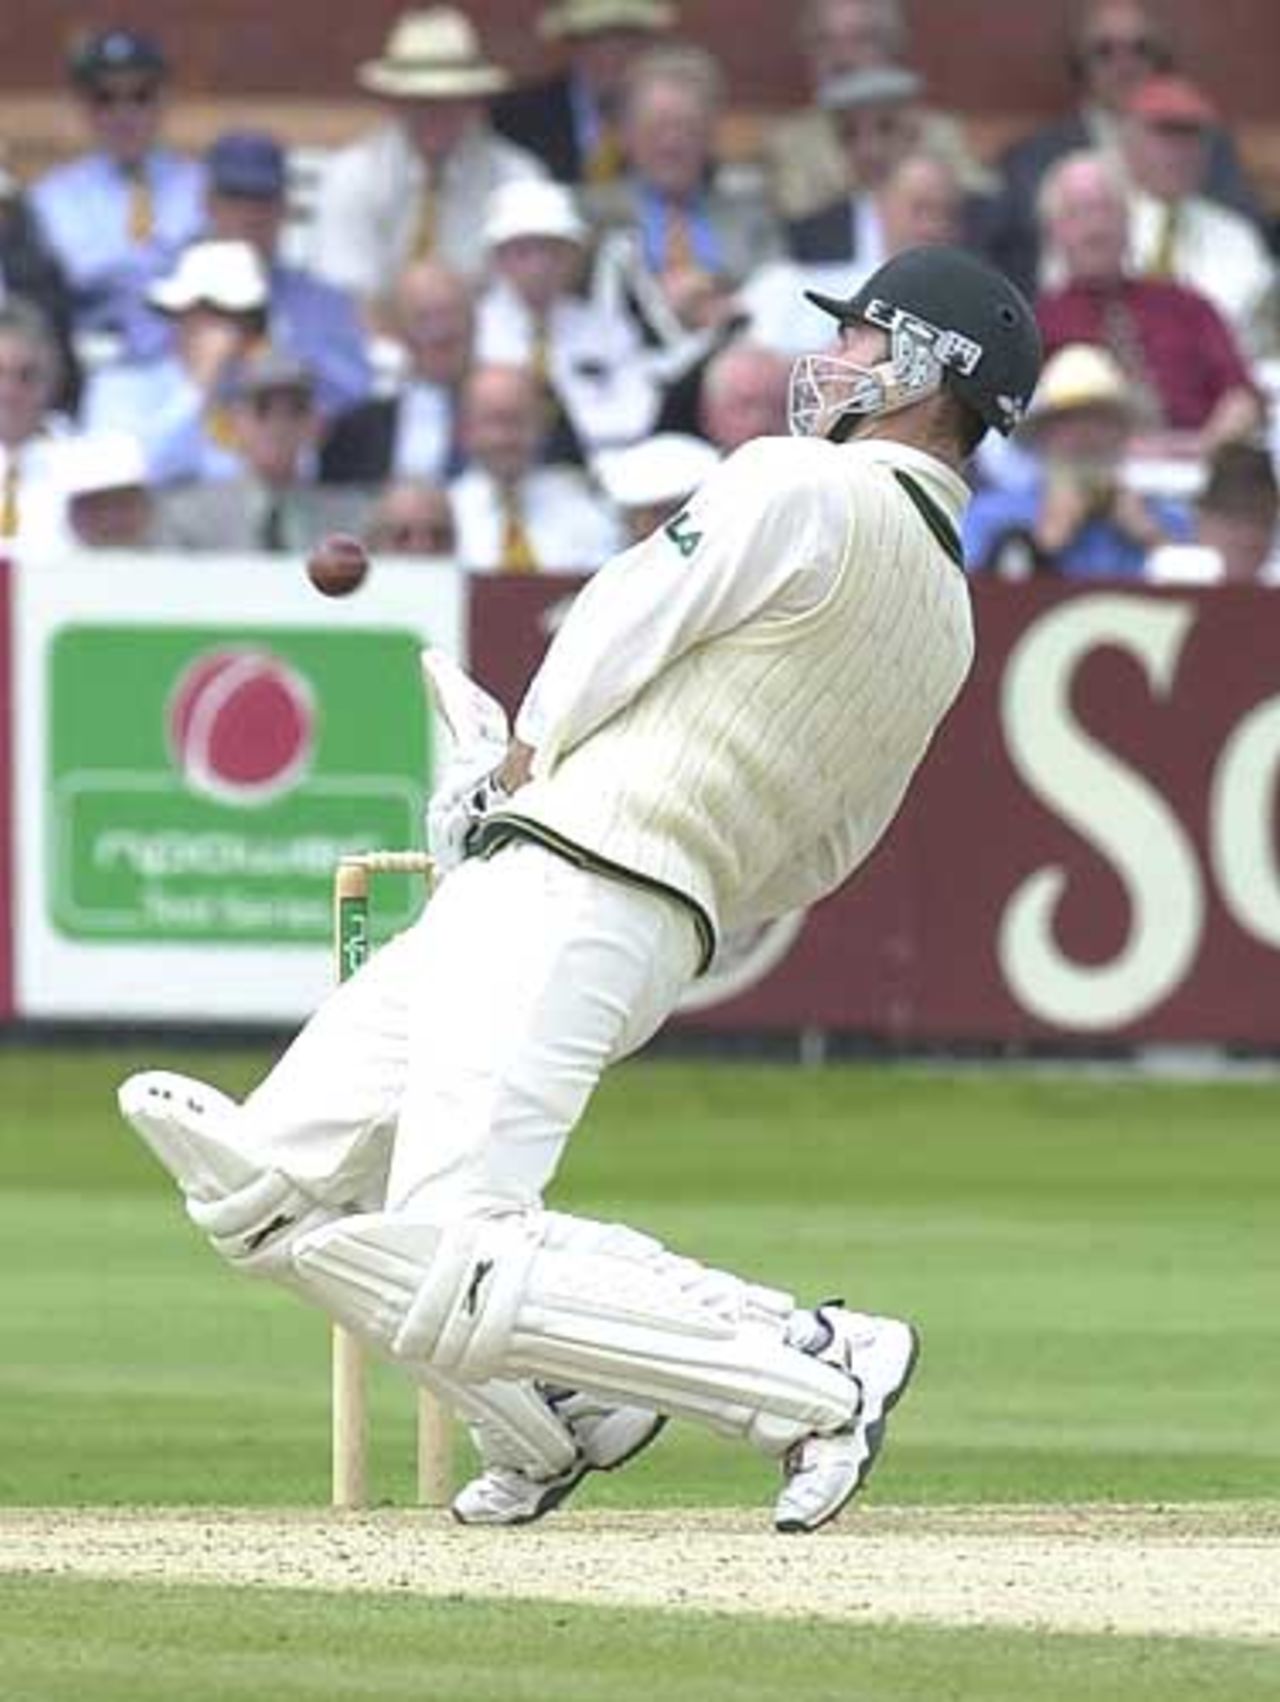 Martyn edges this ball from Caddick to be caught behind, England v Australia, The Ashes 2nd npower Test, Lords, 19-23 July 2001